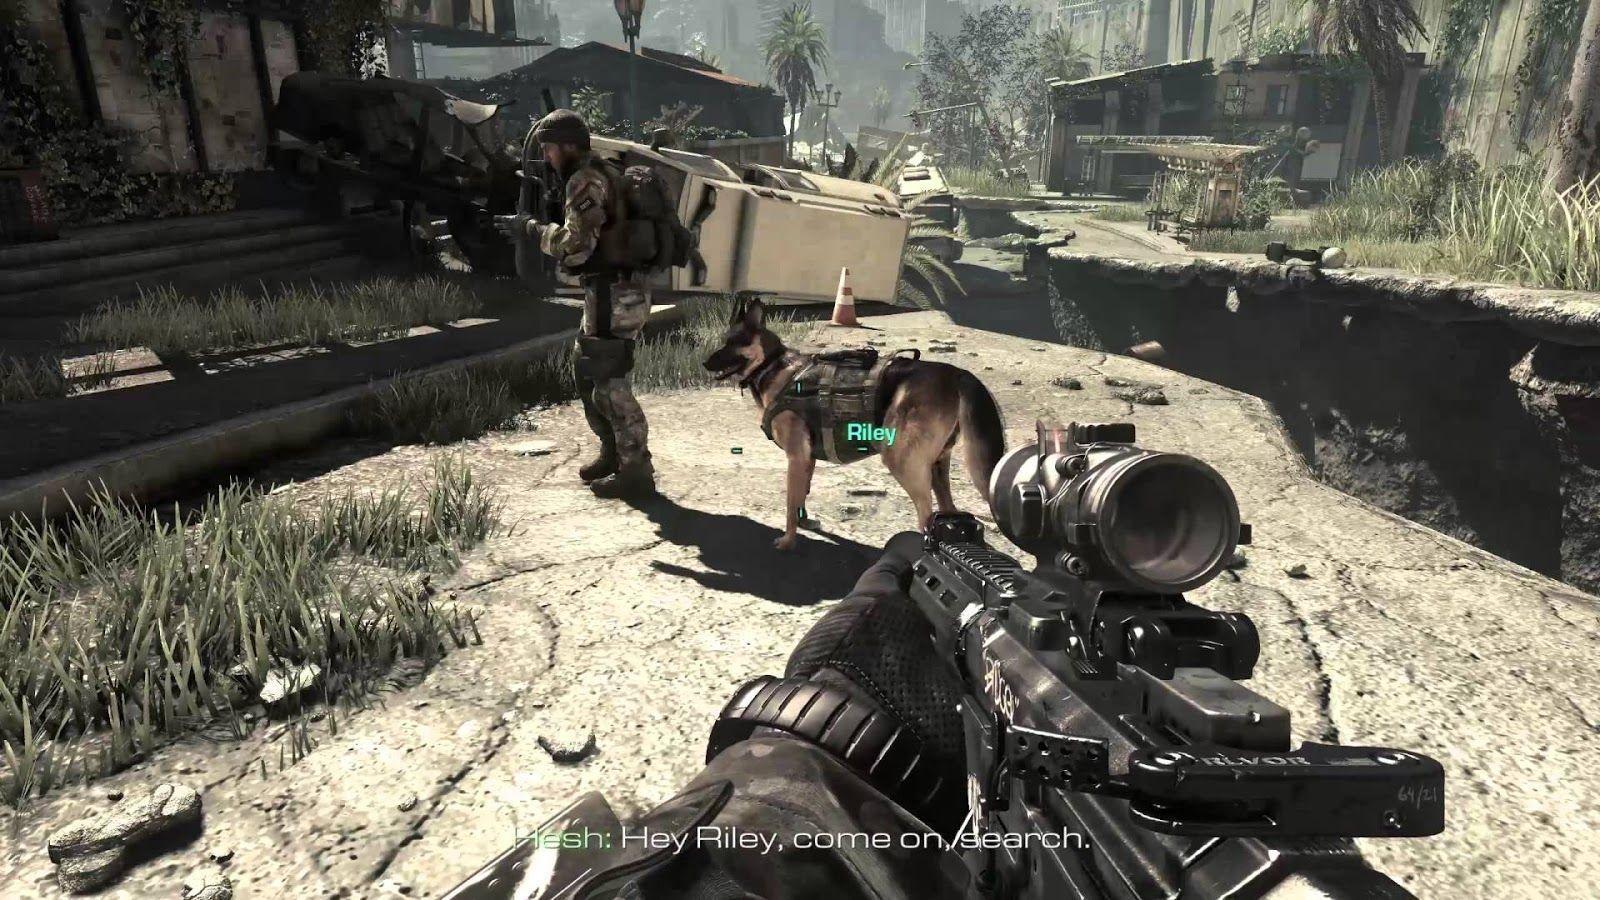 Call Of Duty Ghosts 2 Download PC Game. Full Free PC Game Download